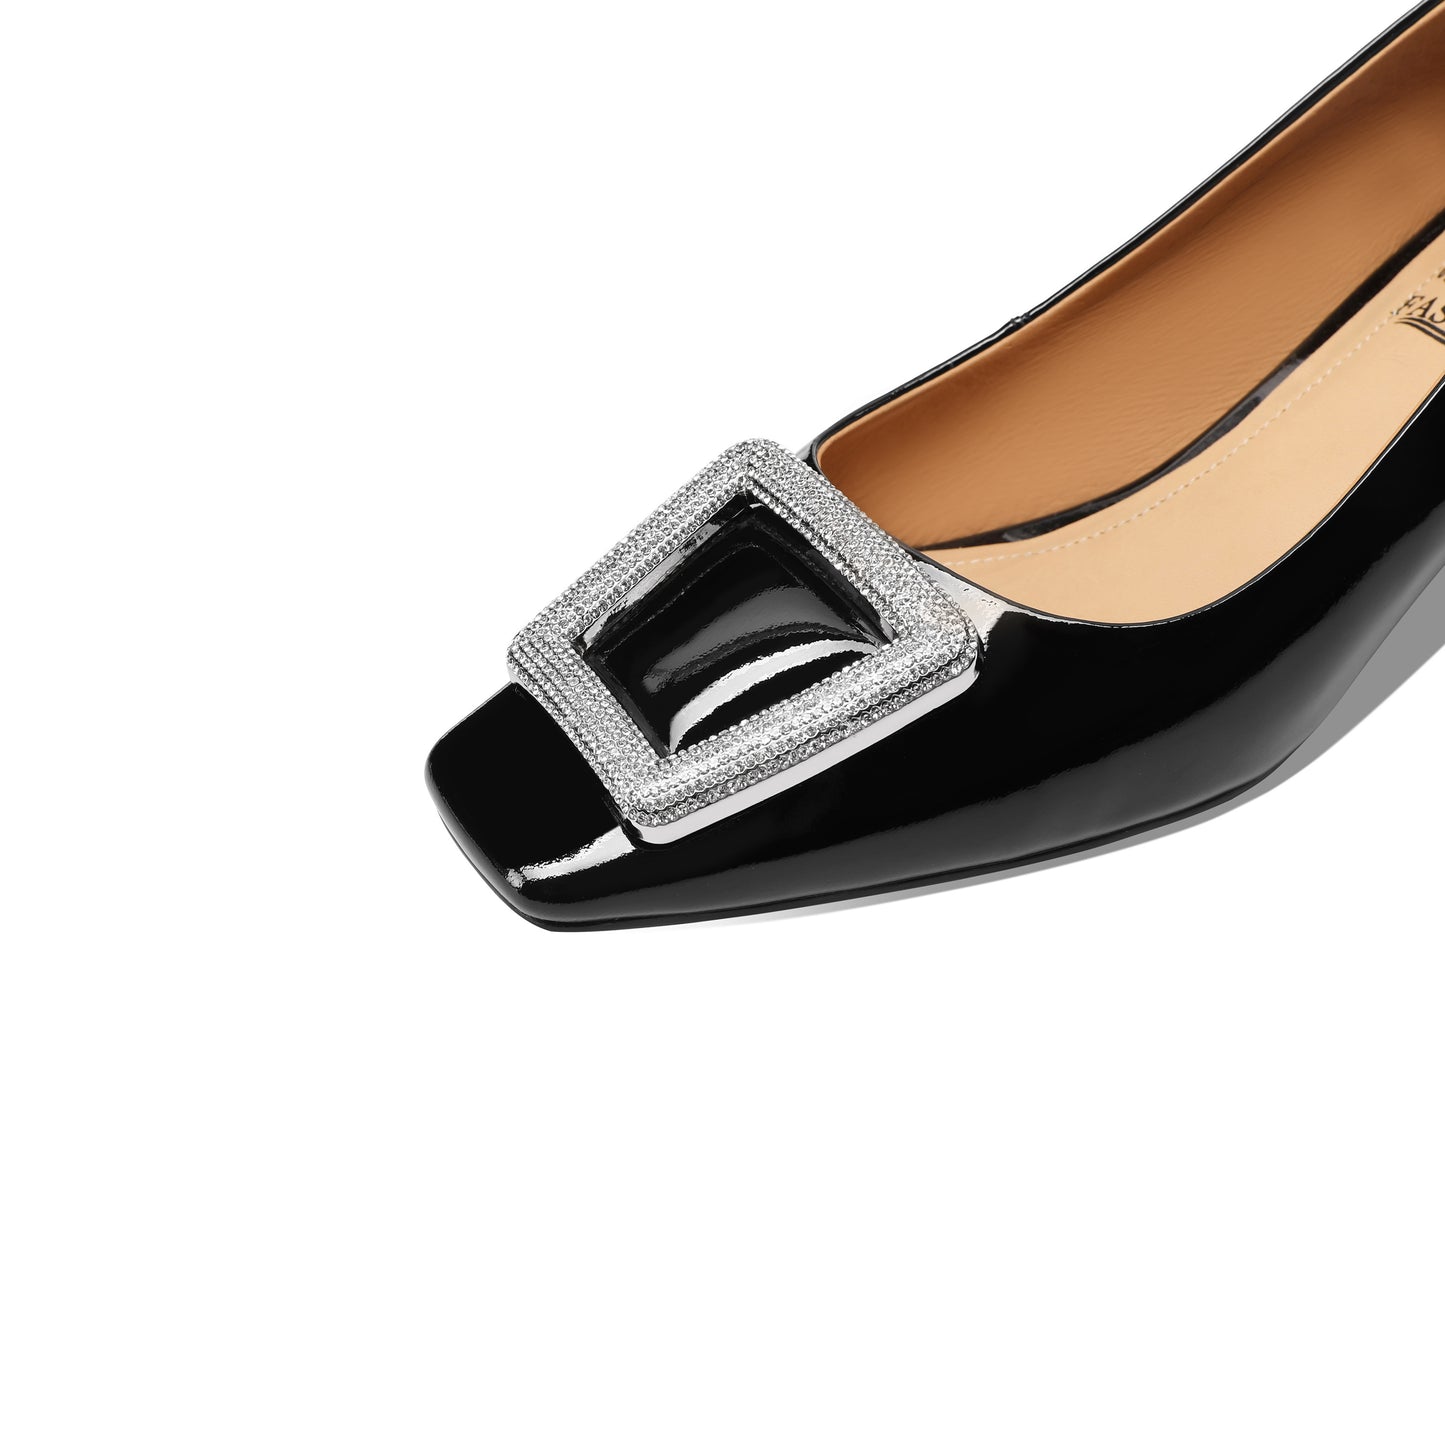 TinaCus Handmade Patent Leather Women's Buckle Square Toe Pumps